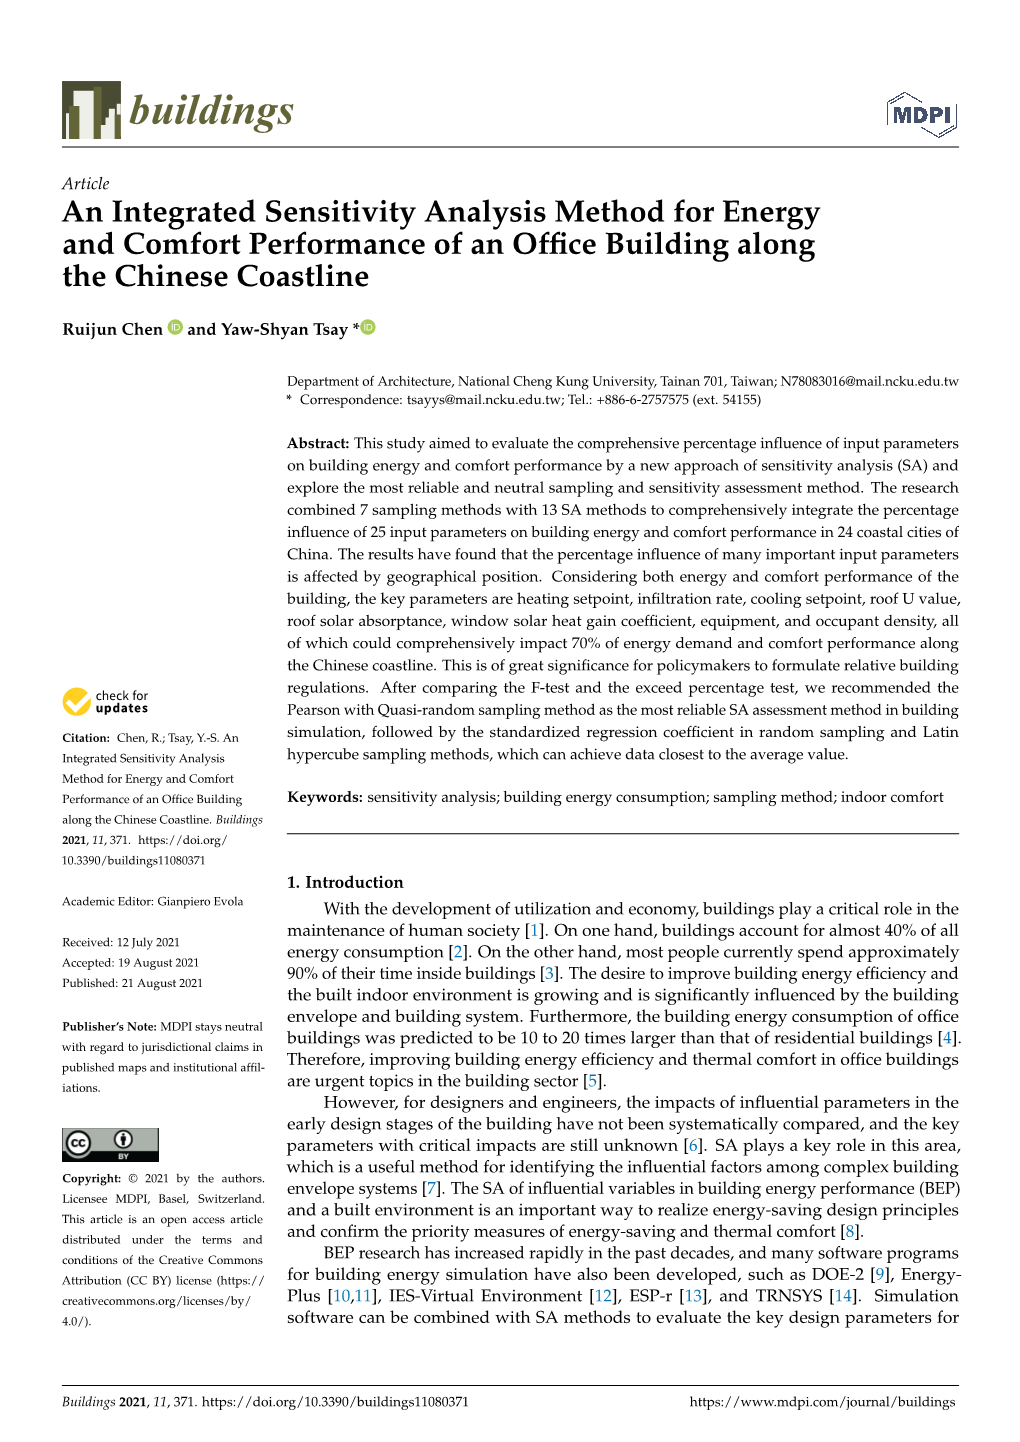 An Integrated Sensitivity Analysis Method for Energy and Comfort Performance of an Ofﬁce Building Along the Chinese Coastline